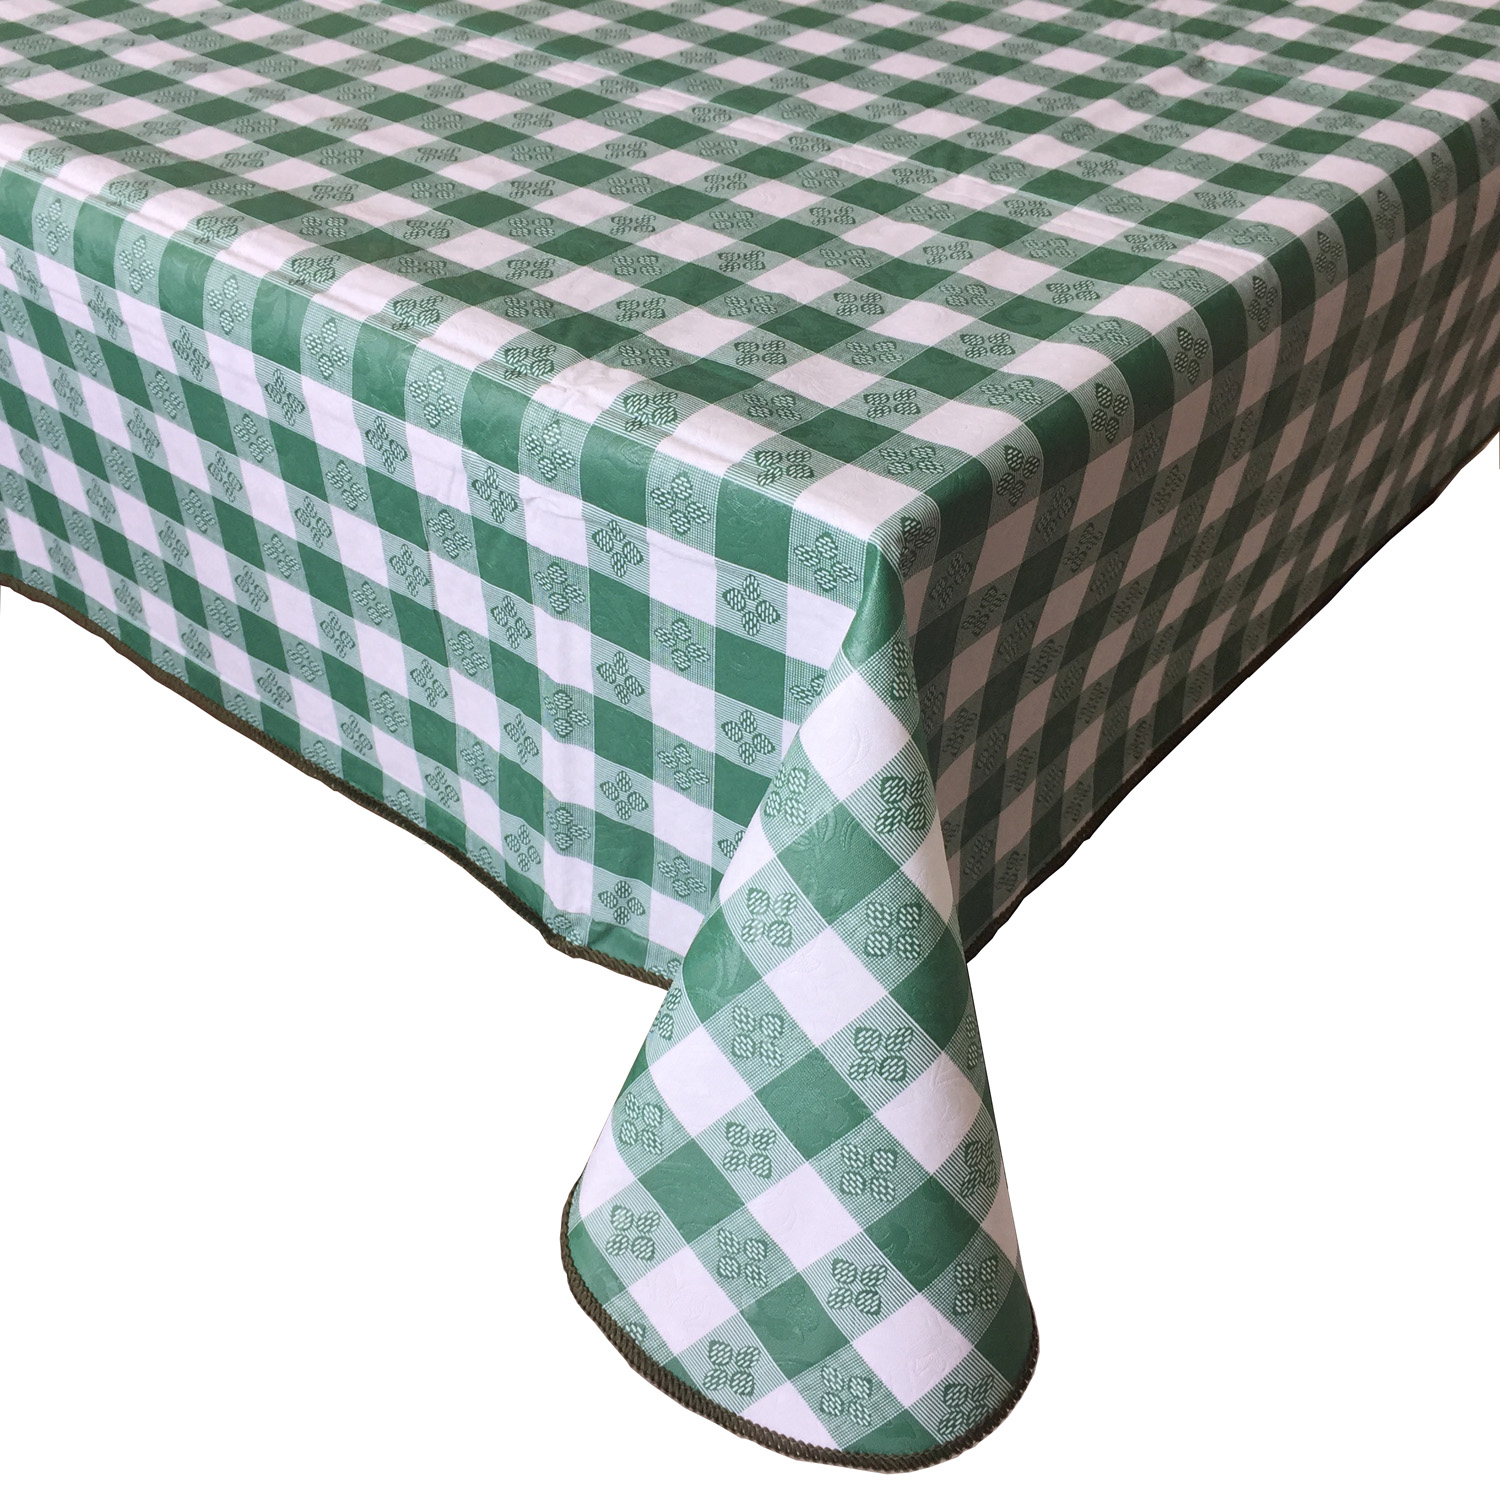 CAC China TCVG-9052G Green Vinyl Table Cover with Flannel Back 90" x 52"